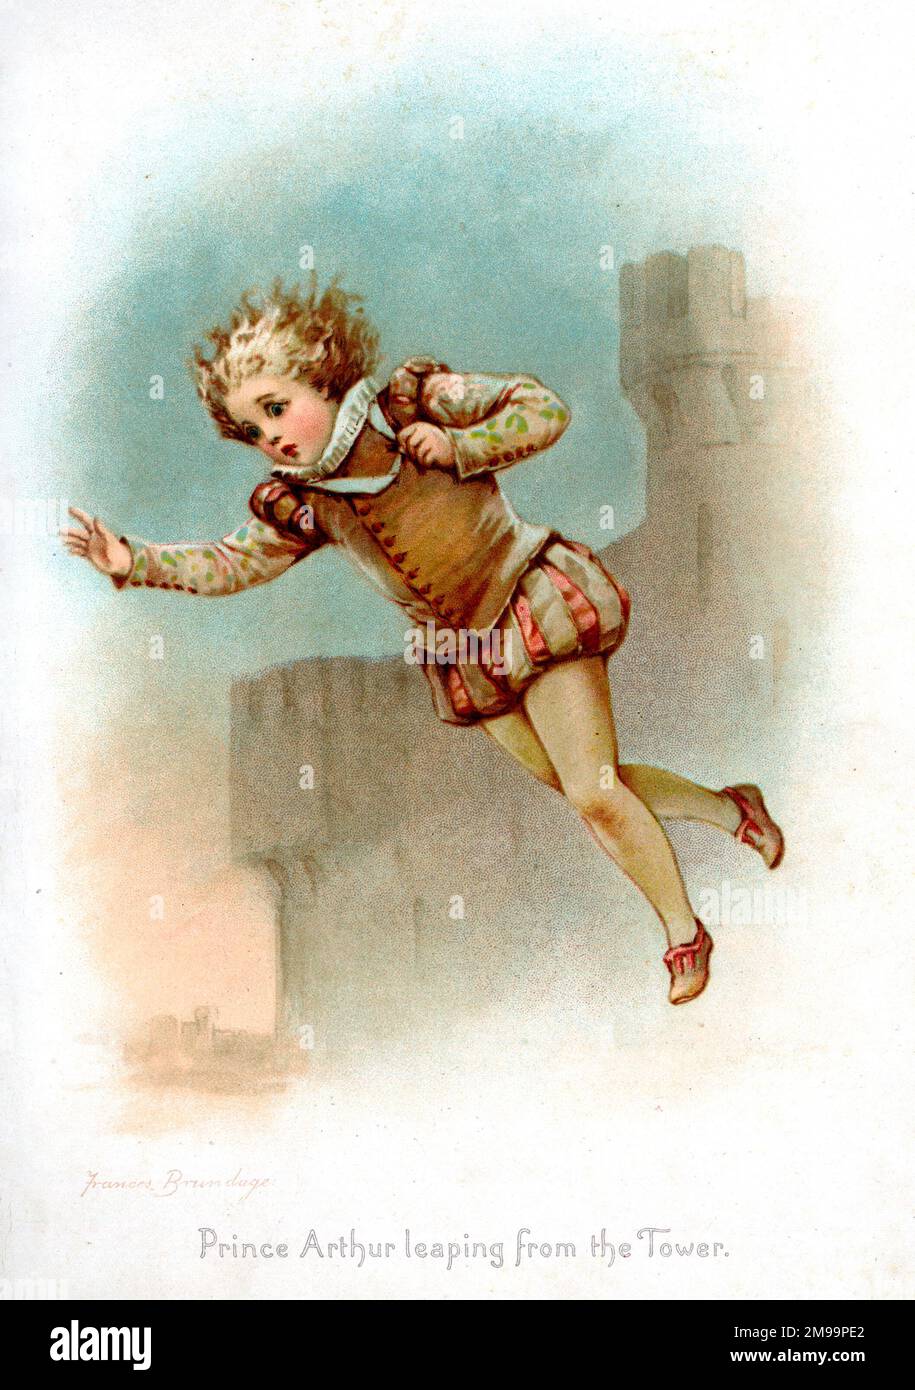 Prince Arthur leaping from the tower.  Prince Arthur, Duke of Brittany, was imprisoned and then disappeared - the story of his fall from a tower probably originates in Shakespeare's play, King John. Stock Photo